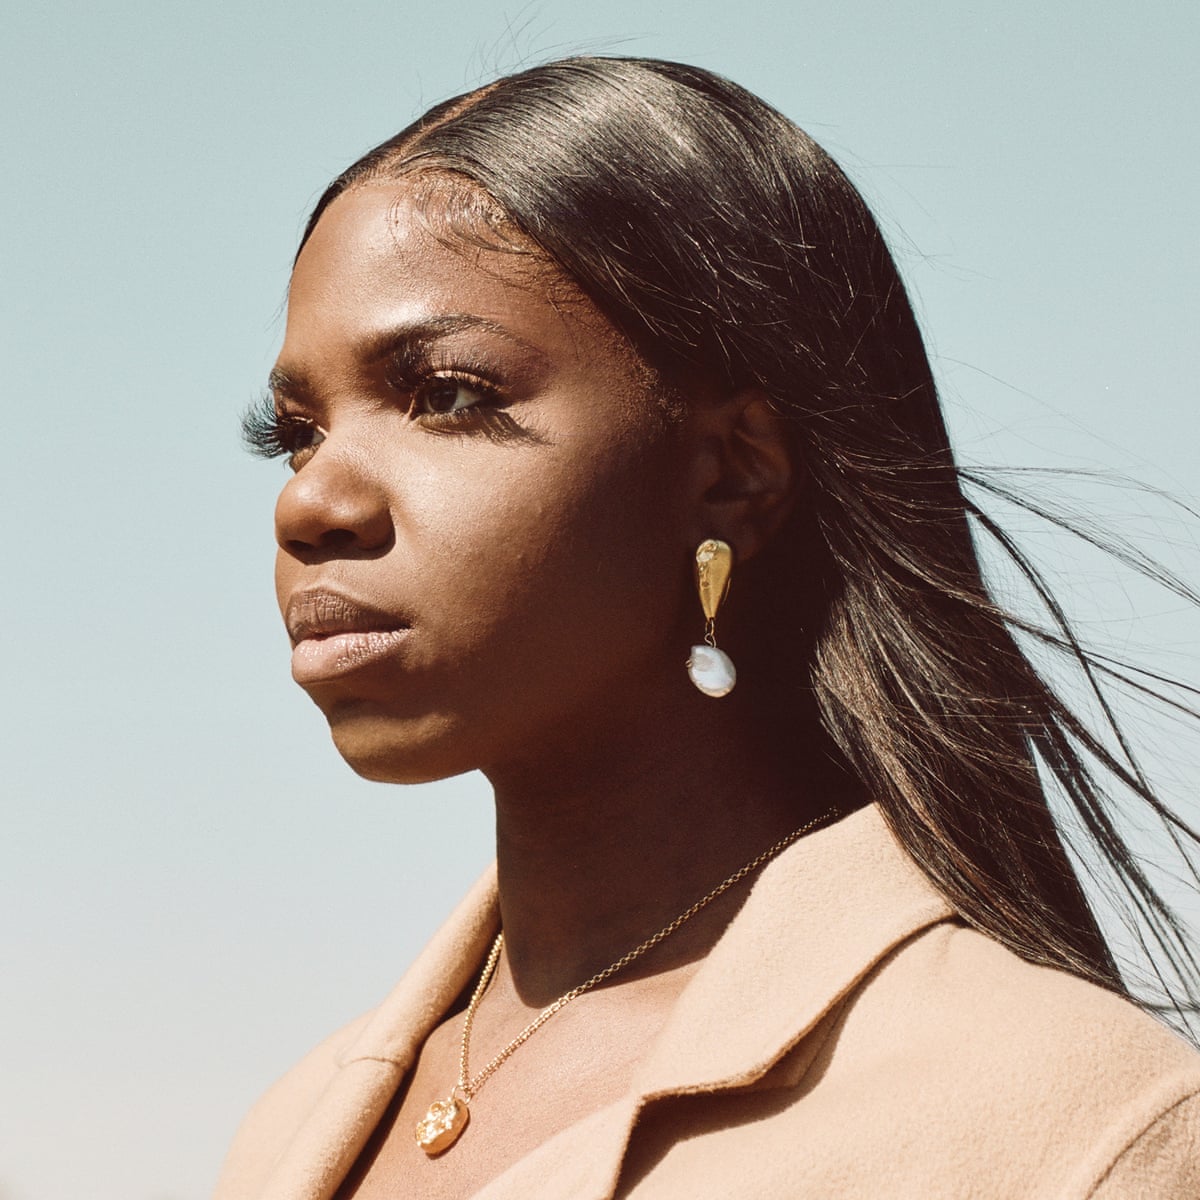 UK rapper Enny: 'Black women are beautiful. They don't get told that  enough' | Music | The Guardian